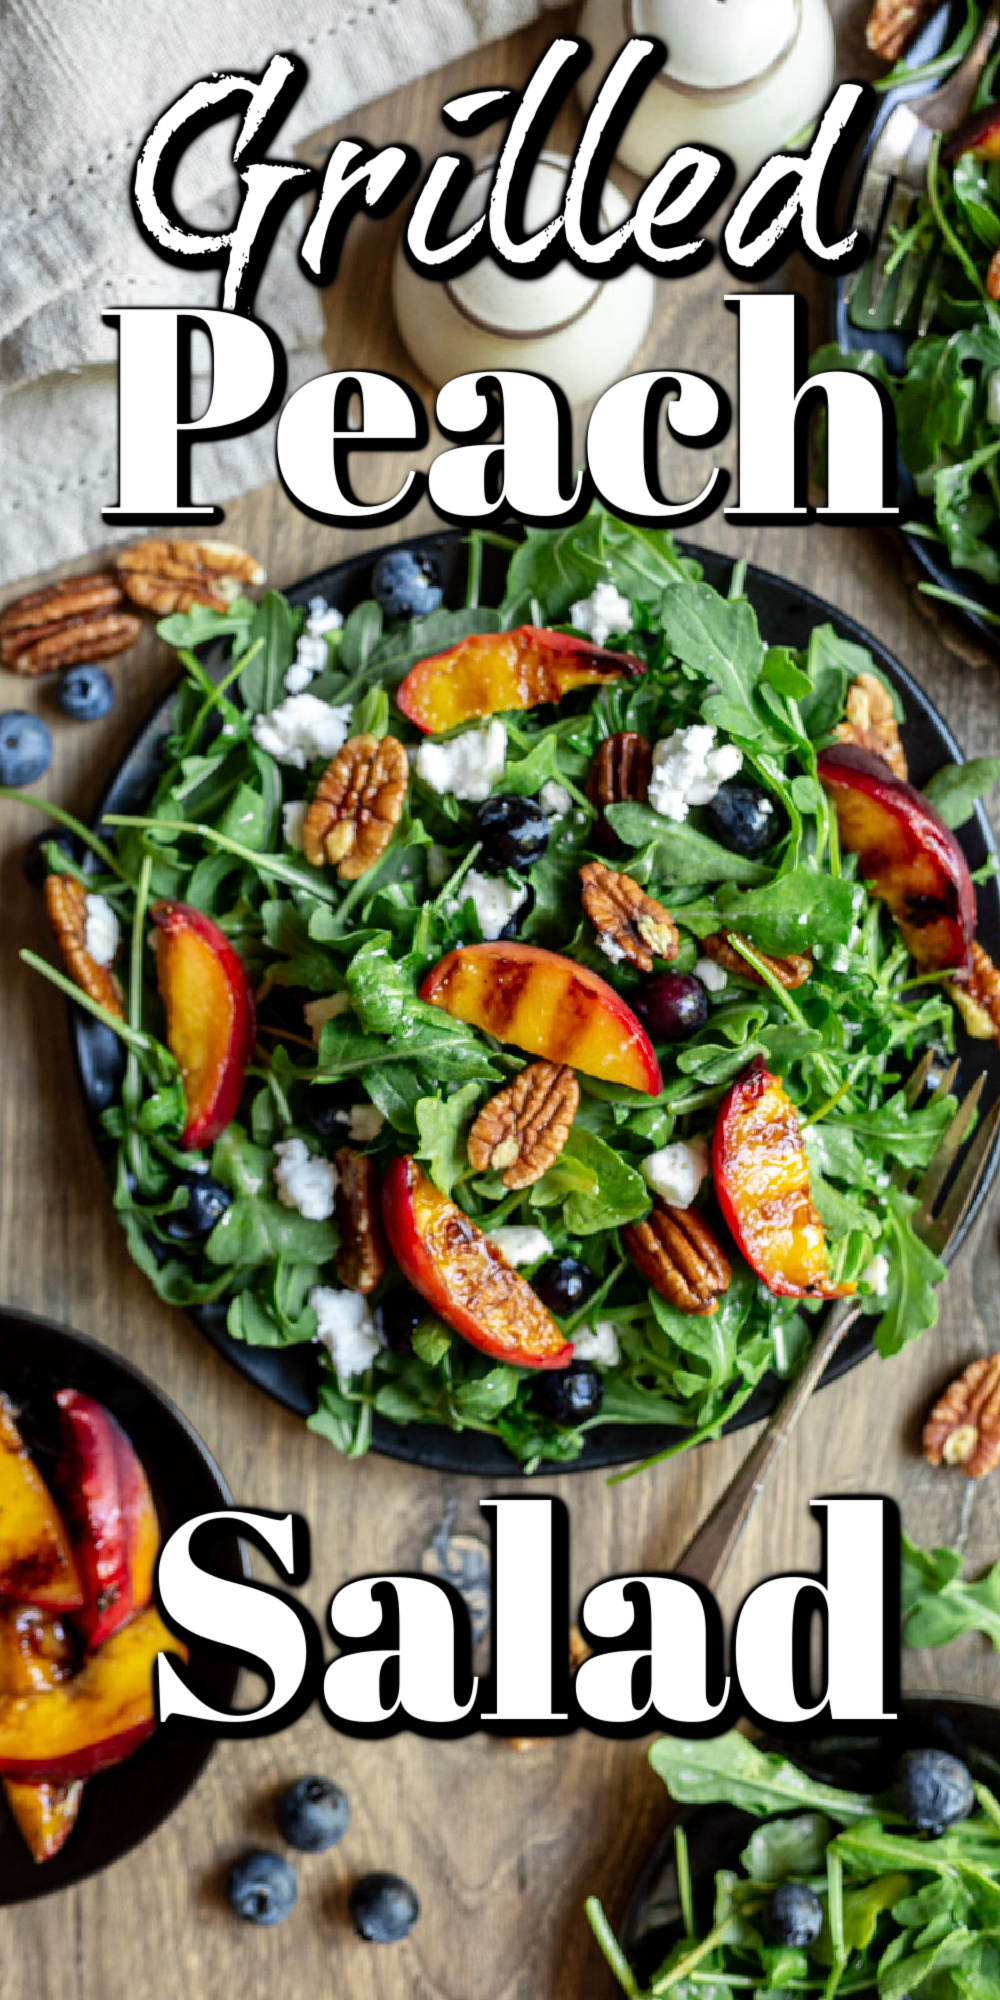 The grilled peach in this salad brings such a wonderful sweet flavor to this salad. Paired with the spicy taste of the arugula, it is the perfect simple summer dish!